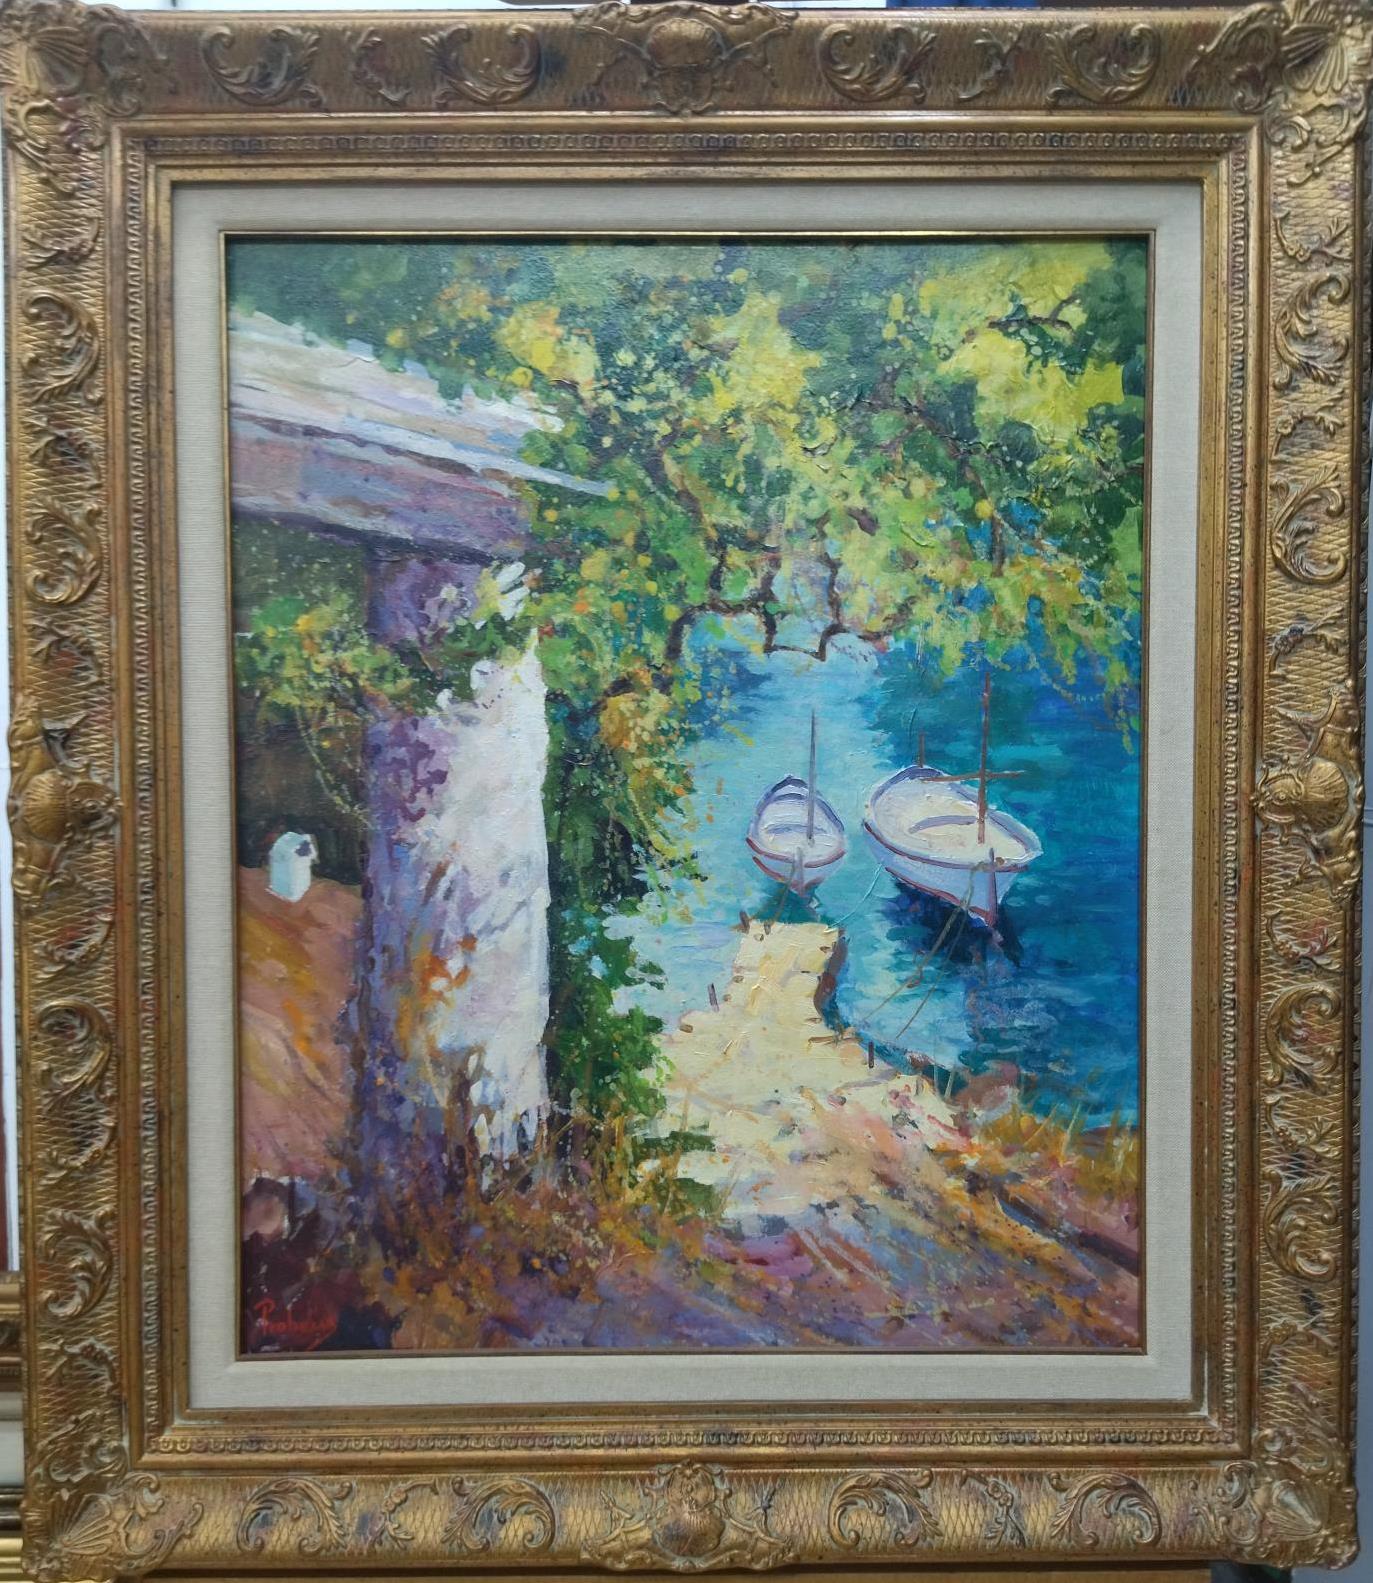 Onofre Prohens Landscape Painting - Prohens Mallorca 2 original acrylic painting